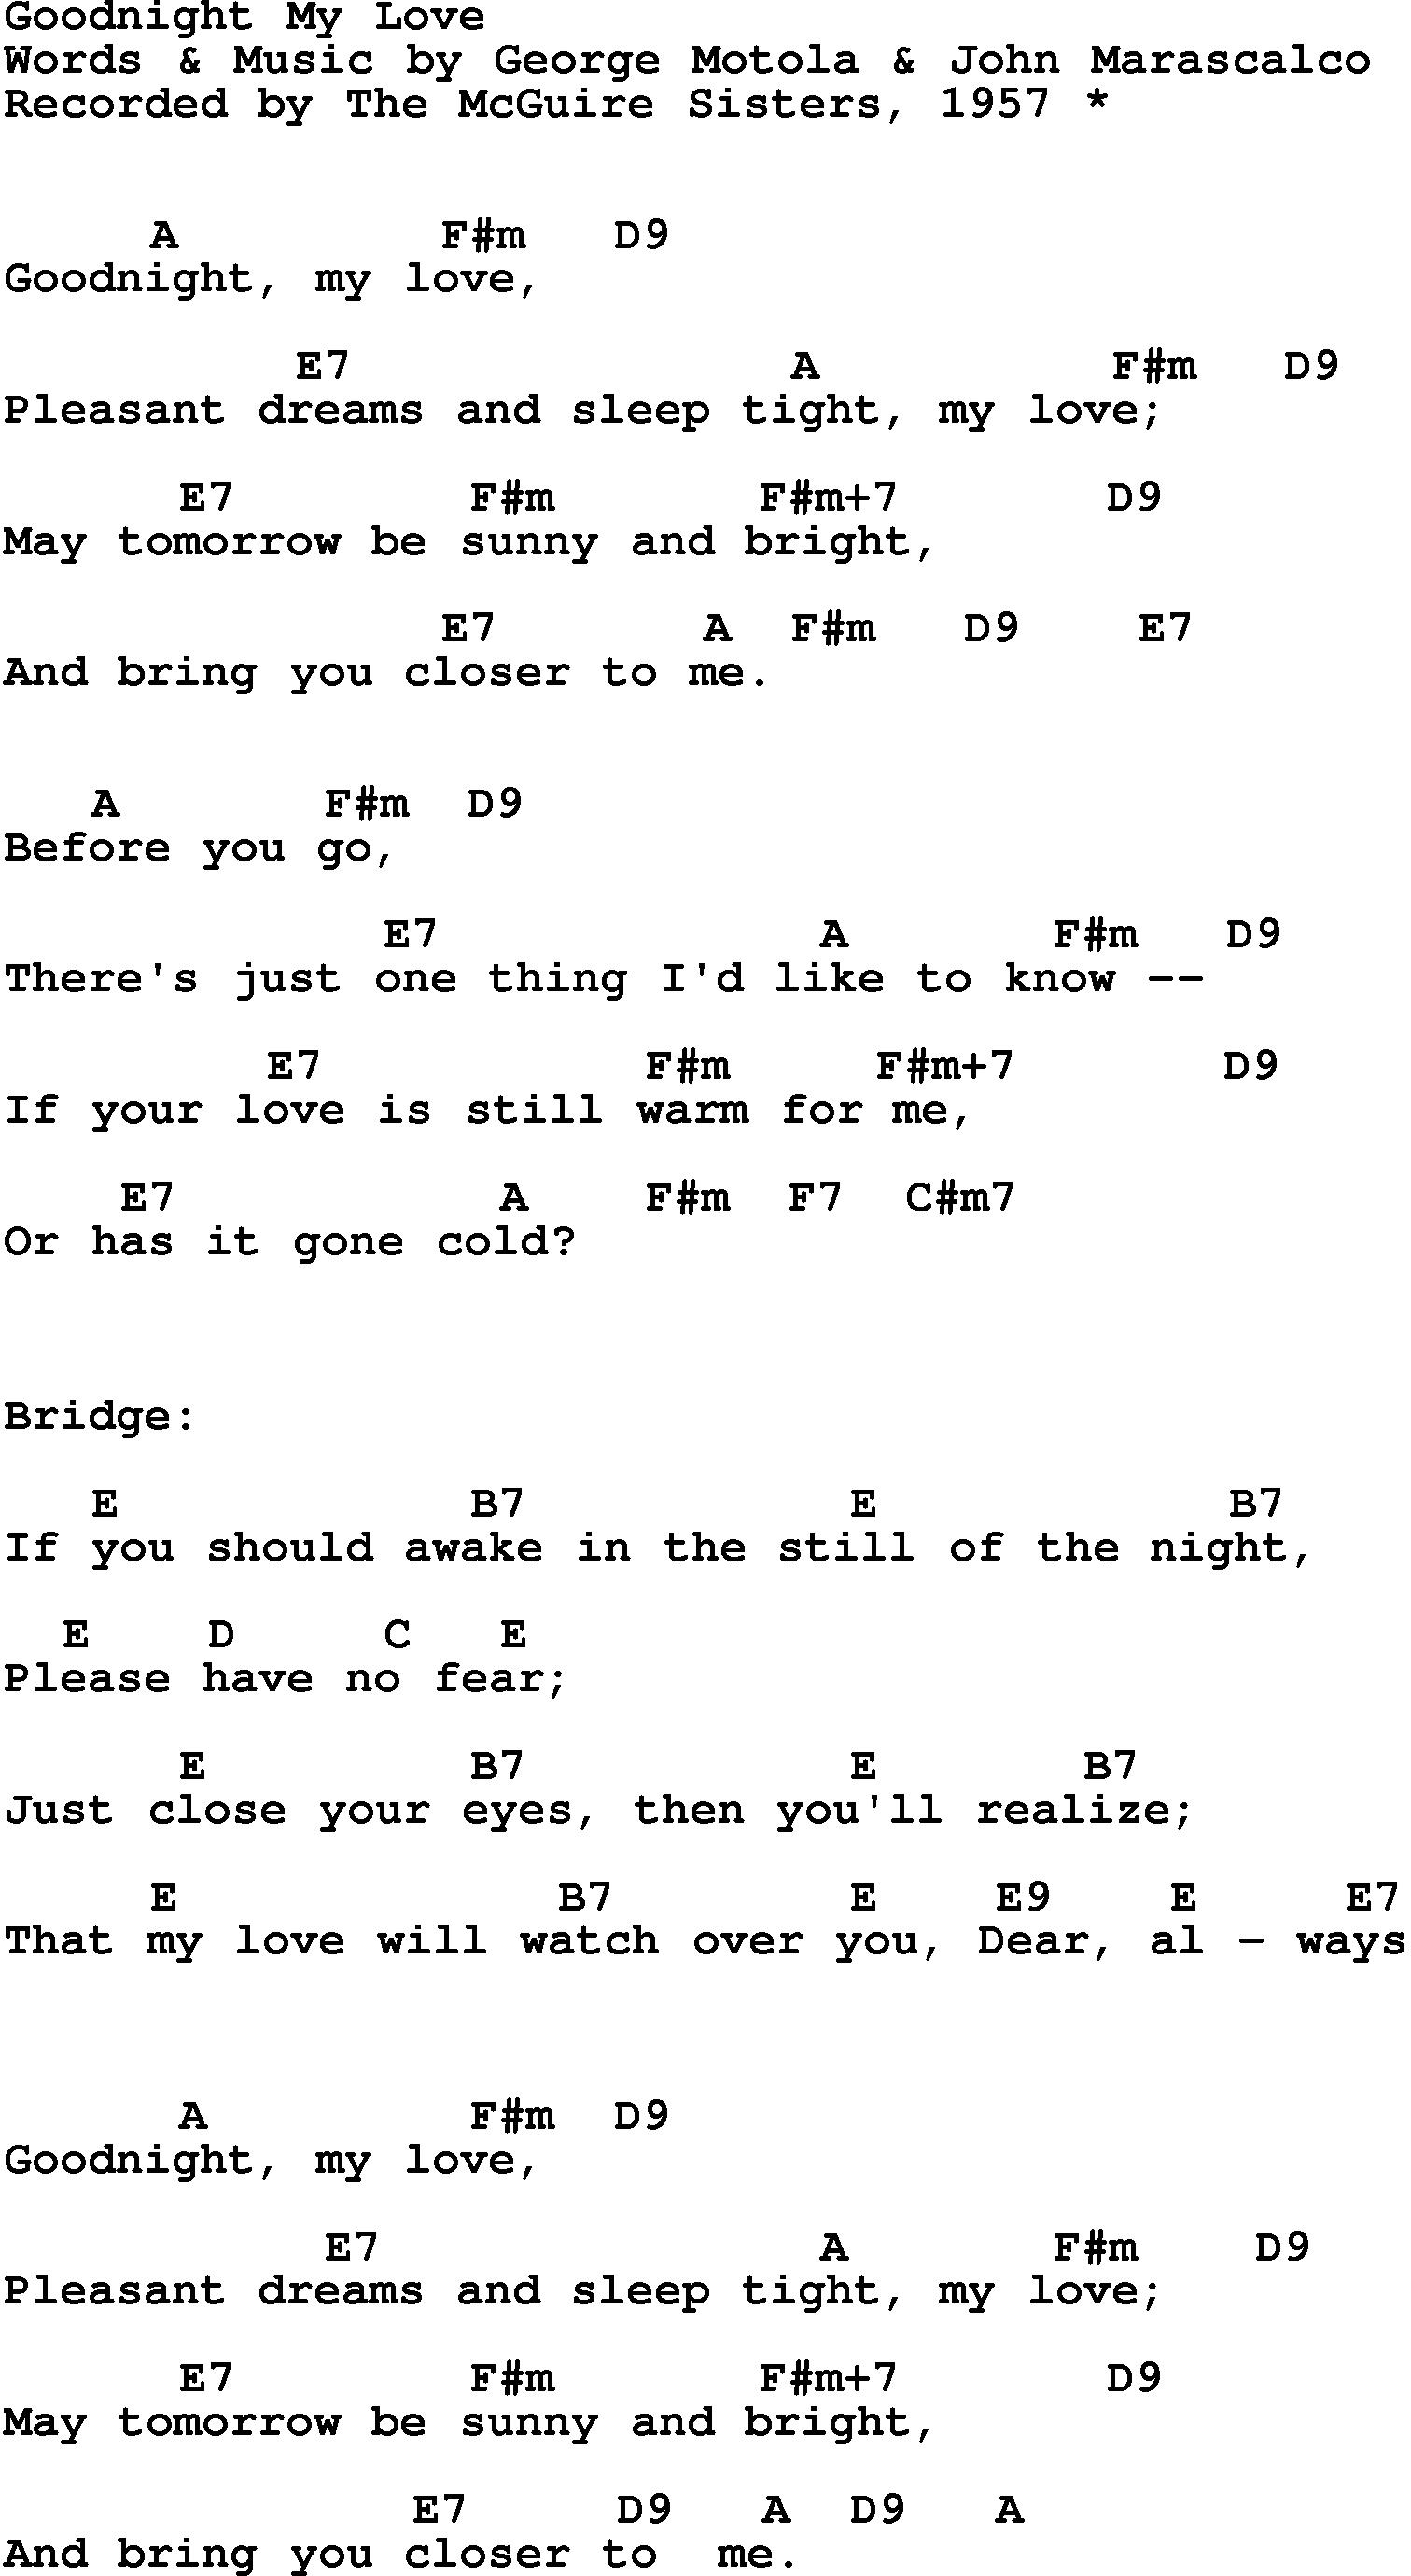 Song Lyrics with guitar chords for Good Night My Love - The Mcguire Sisters, 1957